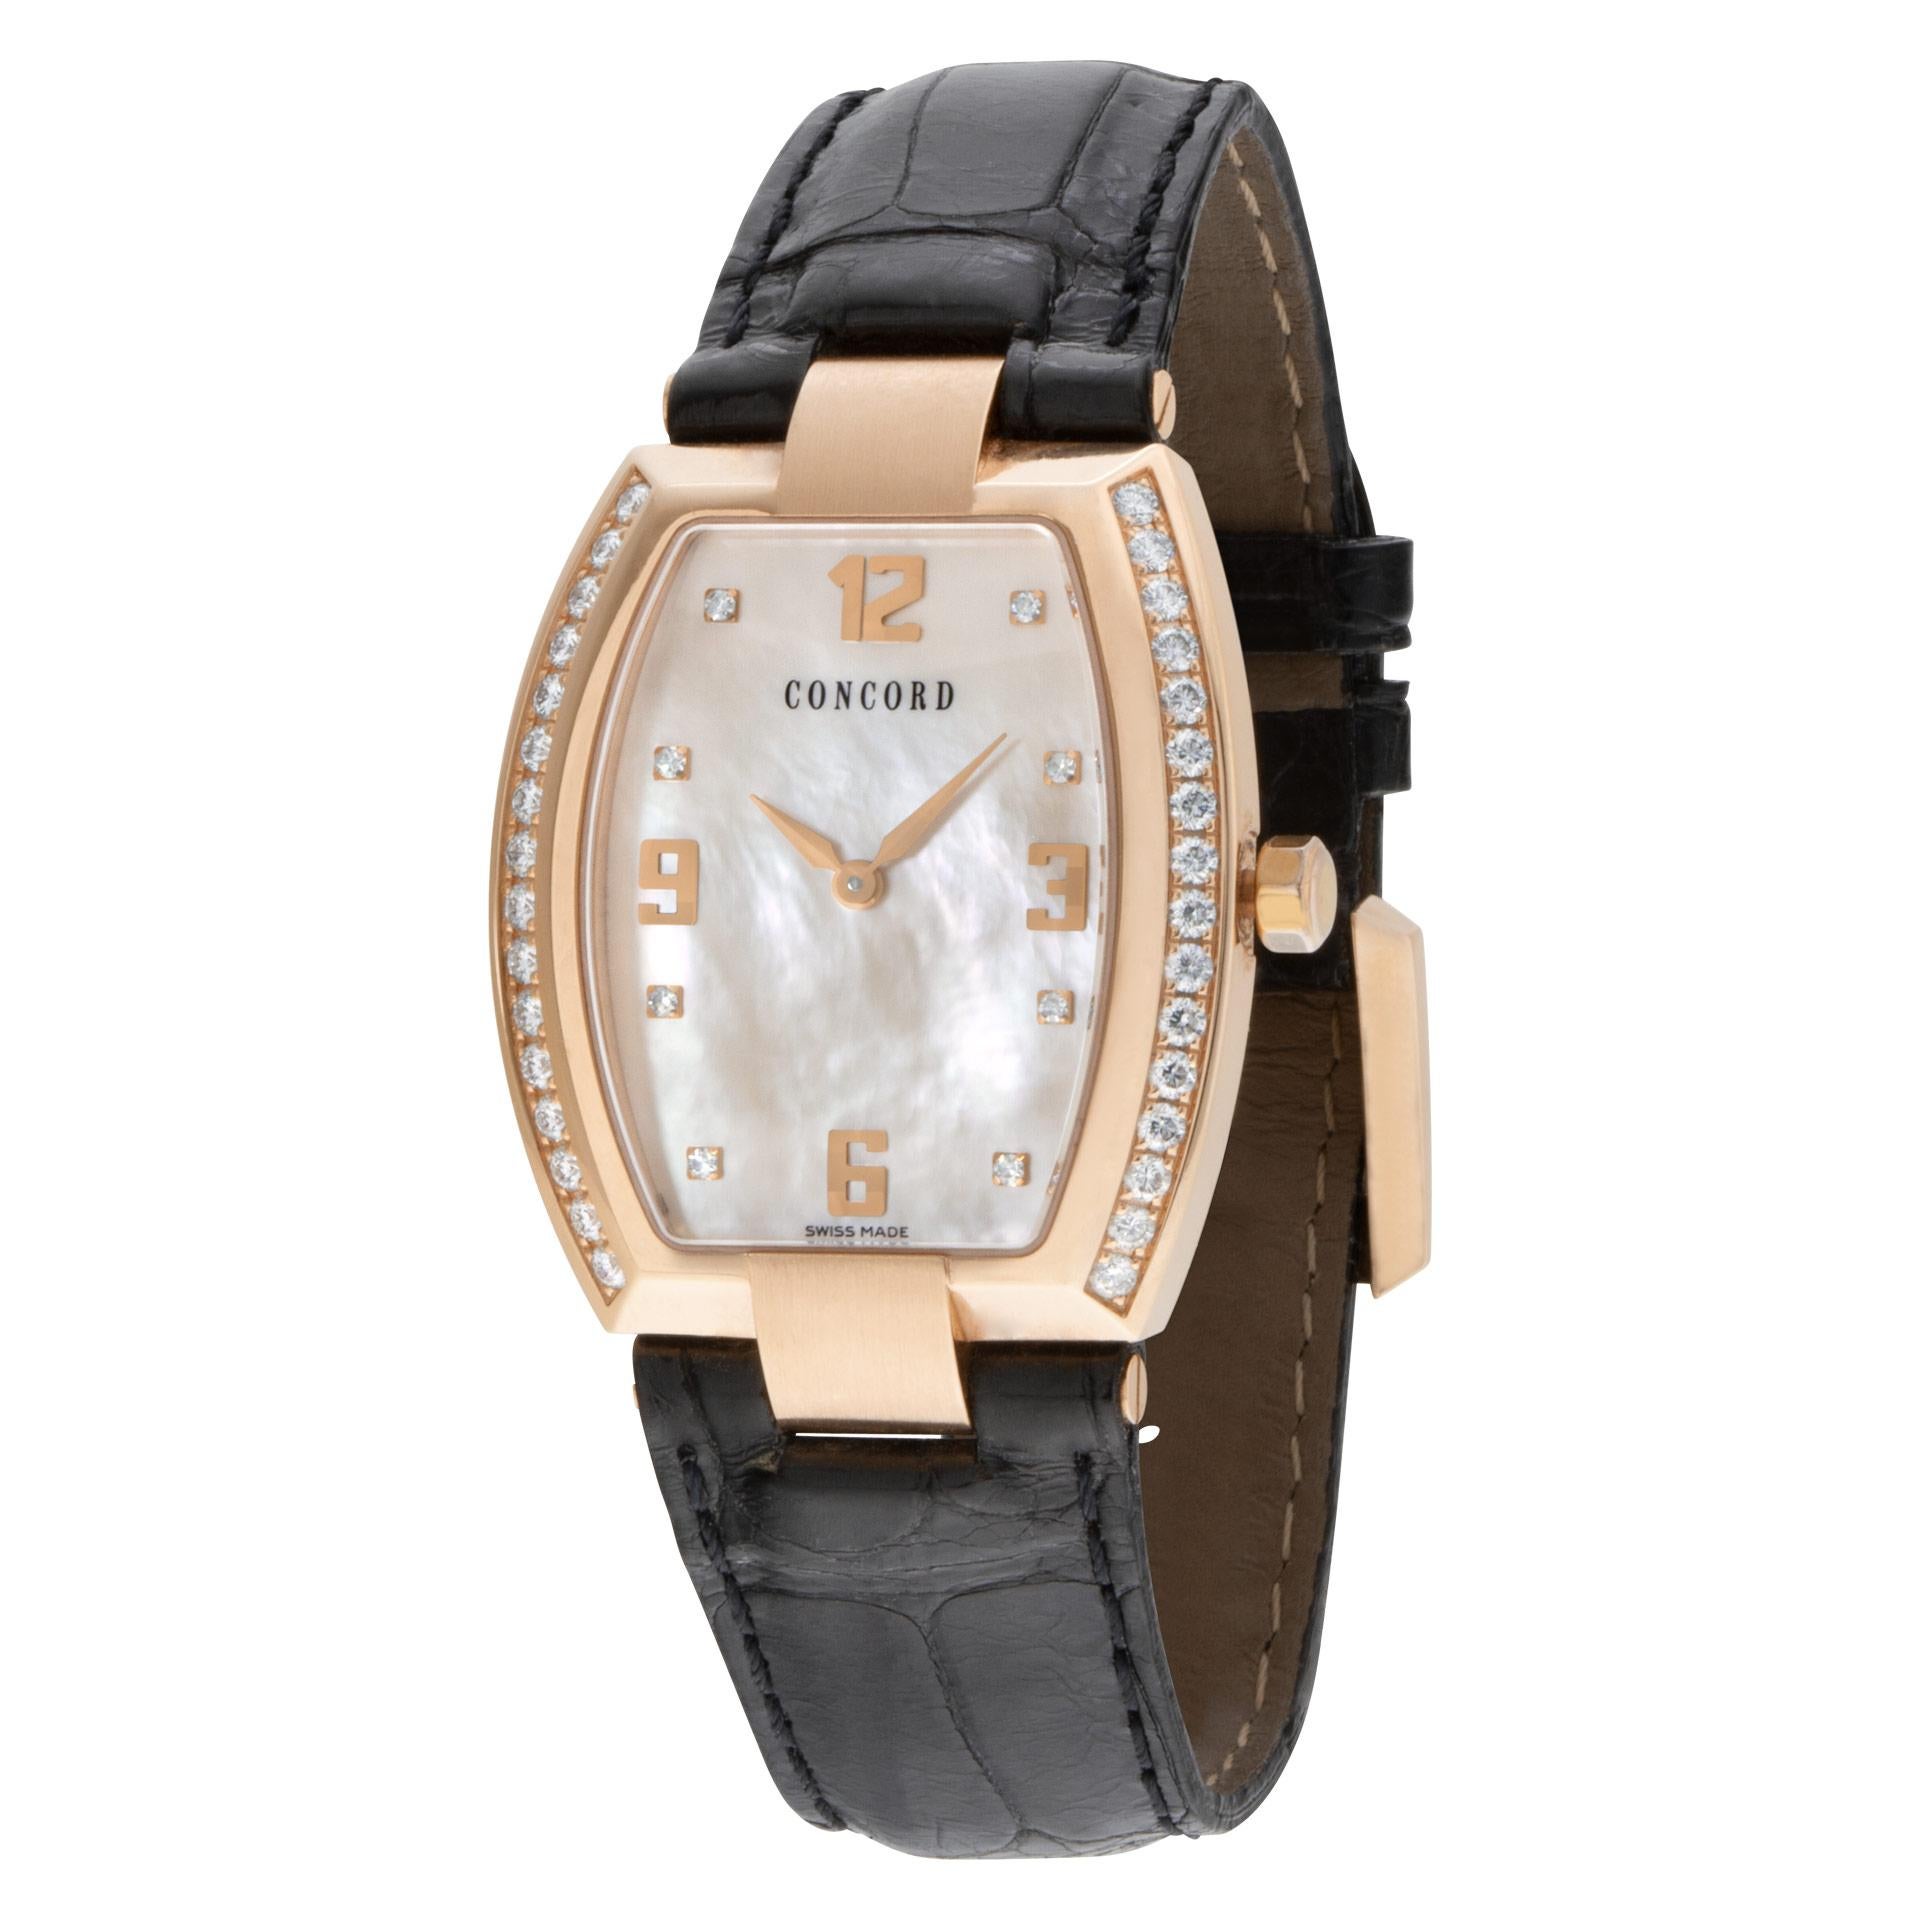 Unisex Concord La Scalla in 18k rose gold with factory original bezel and Mother of Pearl diamond dial on a leather band with 18k rose gold tang buckle. Quartz. Ref 54 G3 1480.0. Fine Pre-owned Concord Watch. Certified preowned Concord La Scala 54